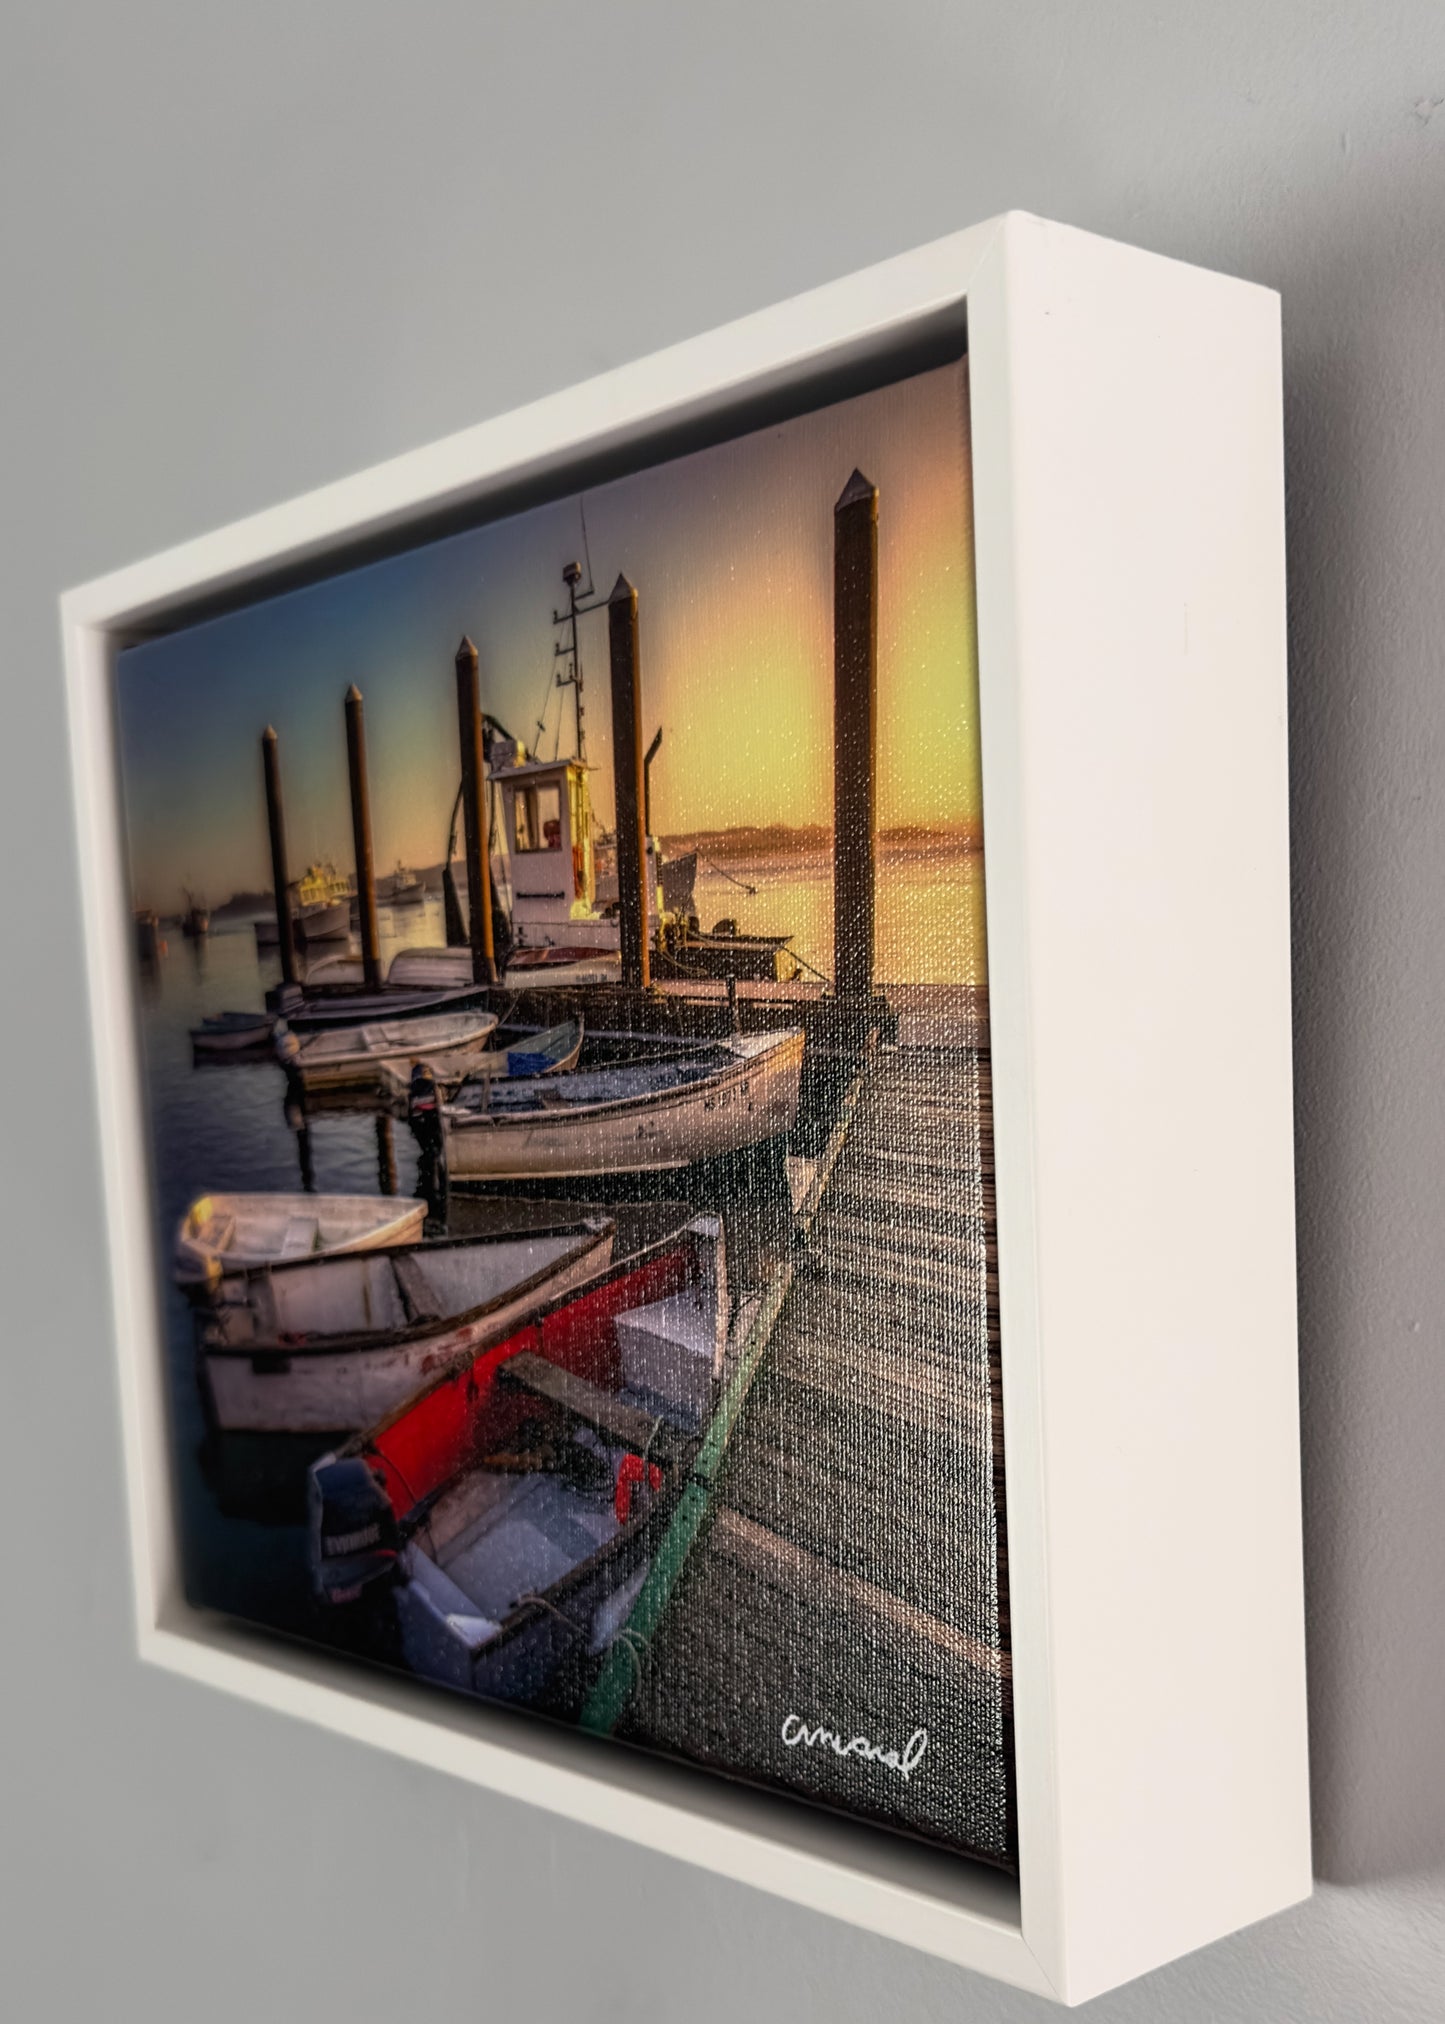 Gallery Wrapped Canvas in a White Wooden Frame - Chatham Pier